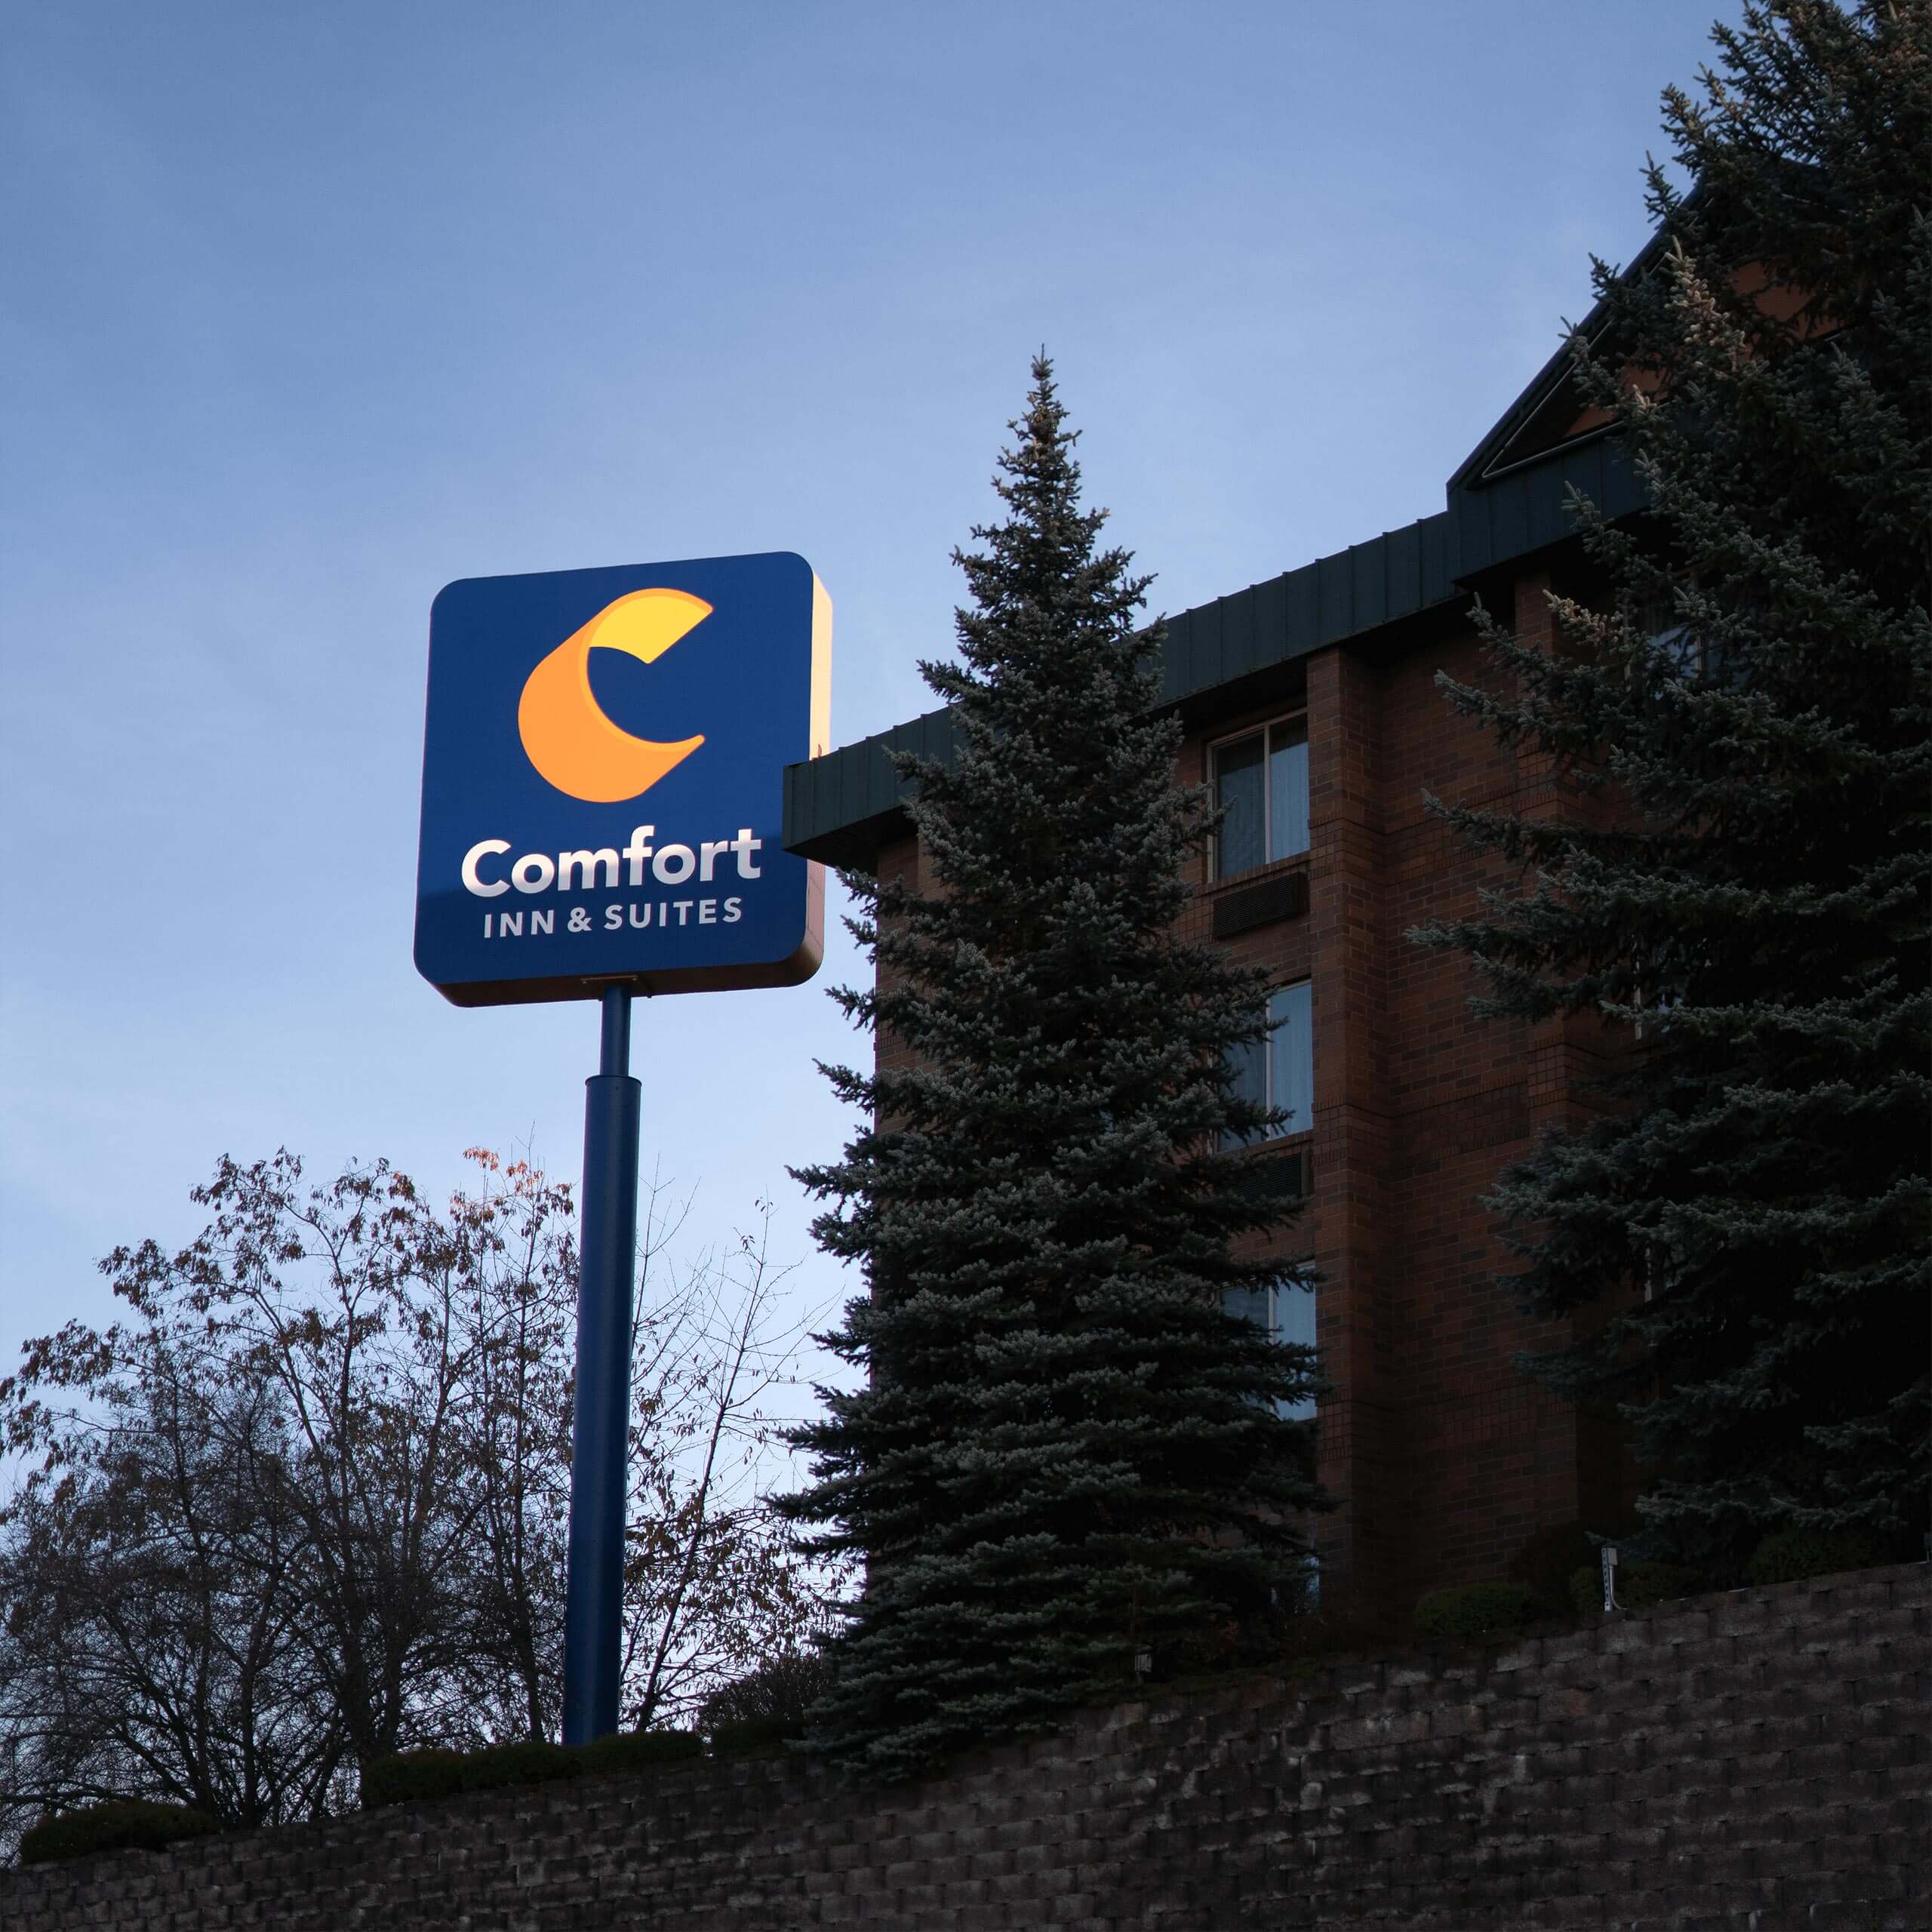 The signage of a Comfort Inn hotel.